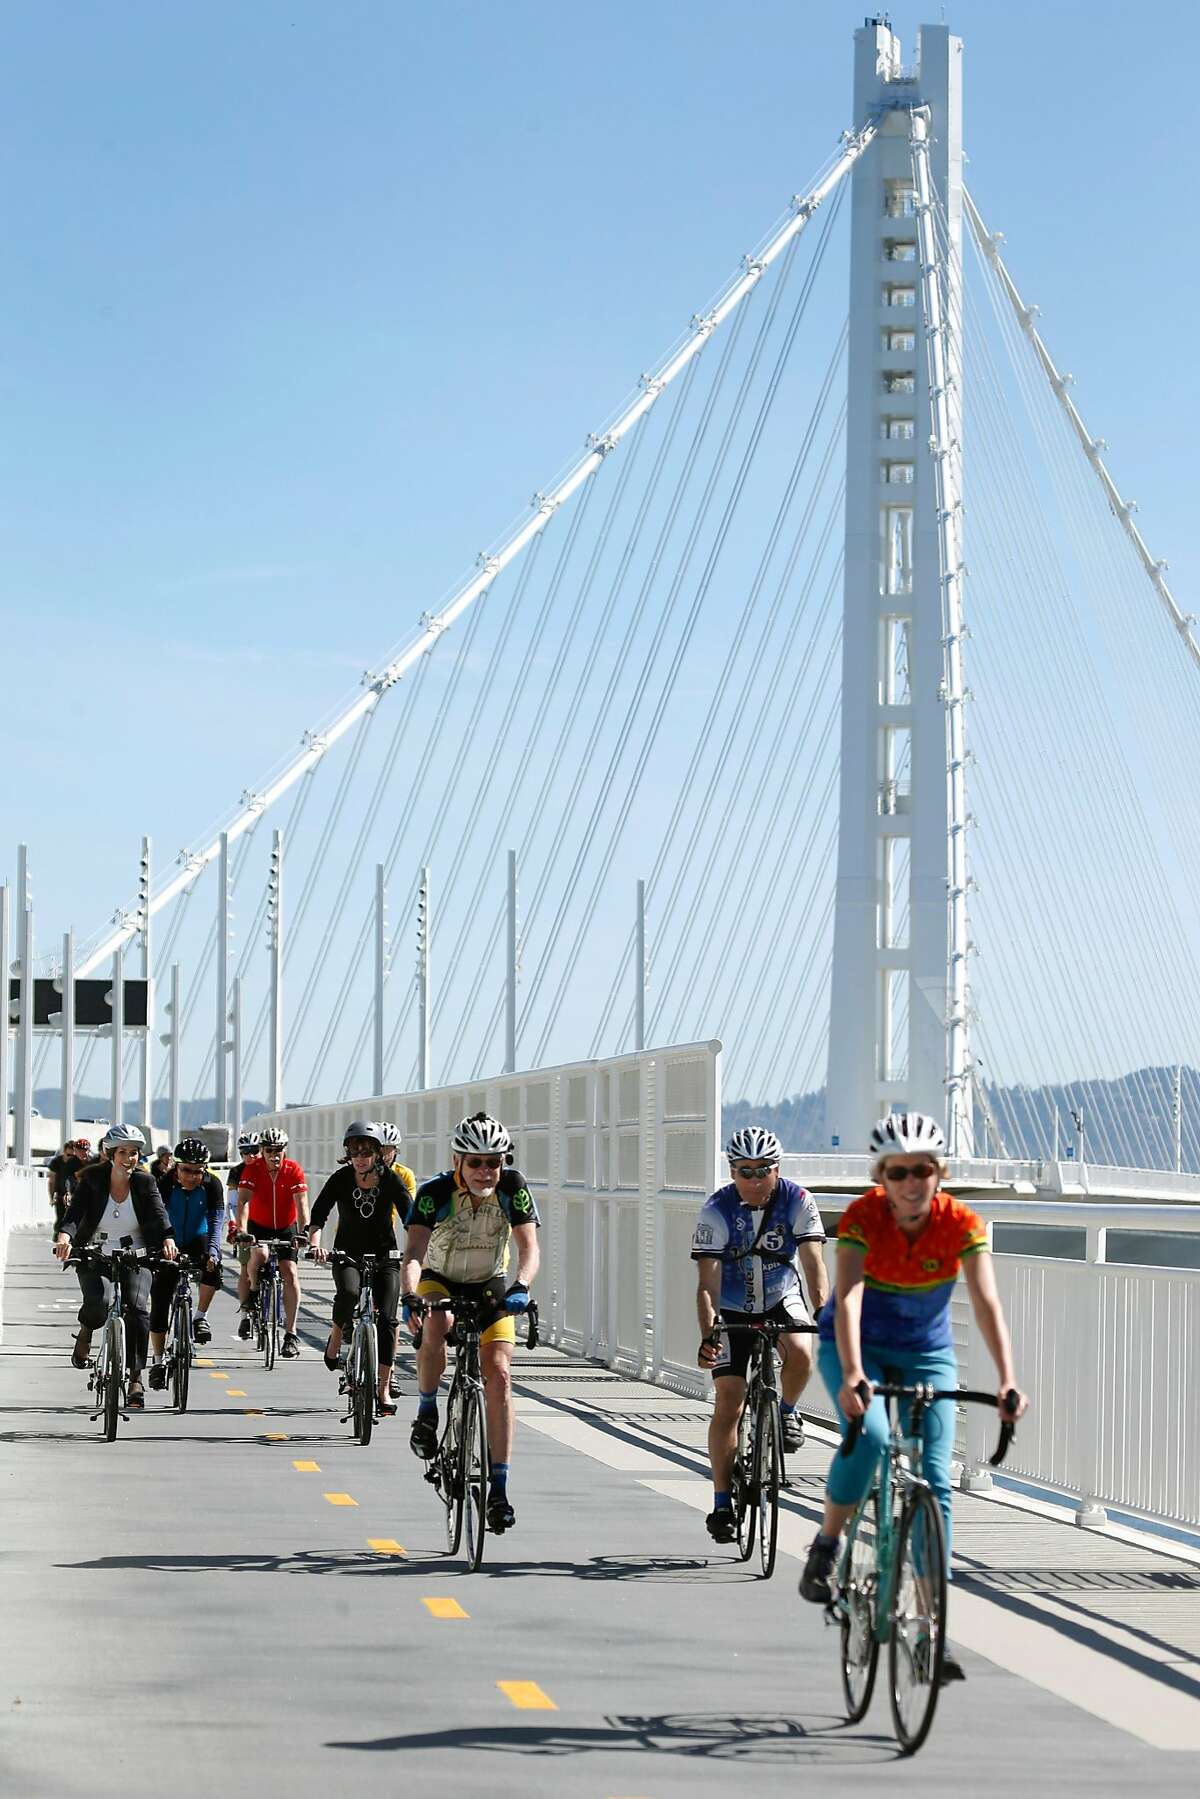 A group of bicyclists, including Oakland Mayor Libby Schaaf, approaches Yerba Buena Island after starting from Oakland on the Bay Bridge Bike Path in San Francisco, Calif. on Tuesday, May 2, 2017. Transportation officials dedicated a new vista point overlooking the new eastern span and the East Bay on the same day the 2.2 mile bike and pedestrian path opened on weekdays making it accessible 7 days a week.